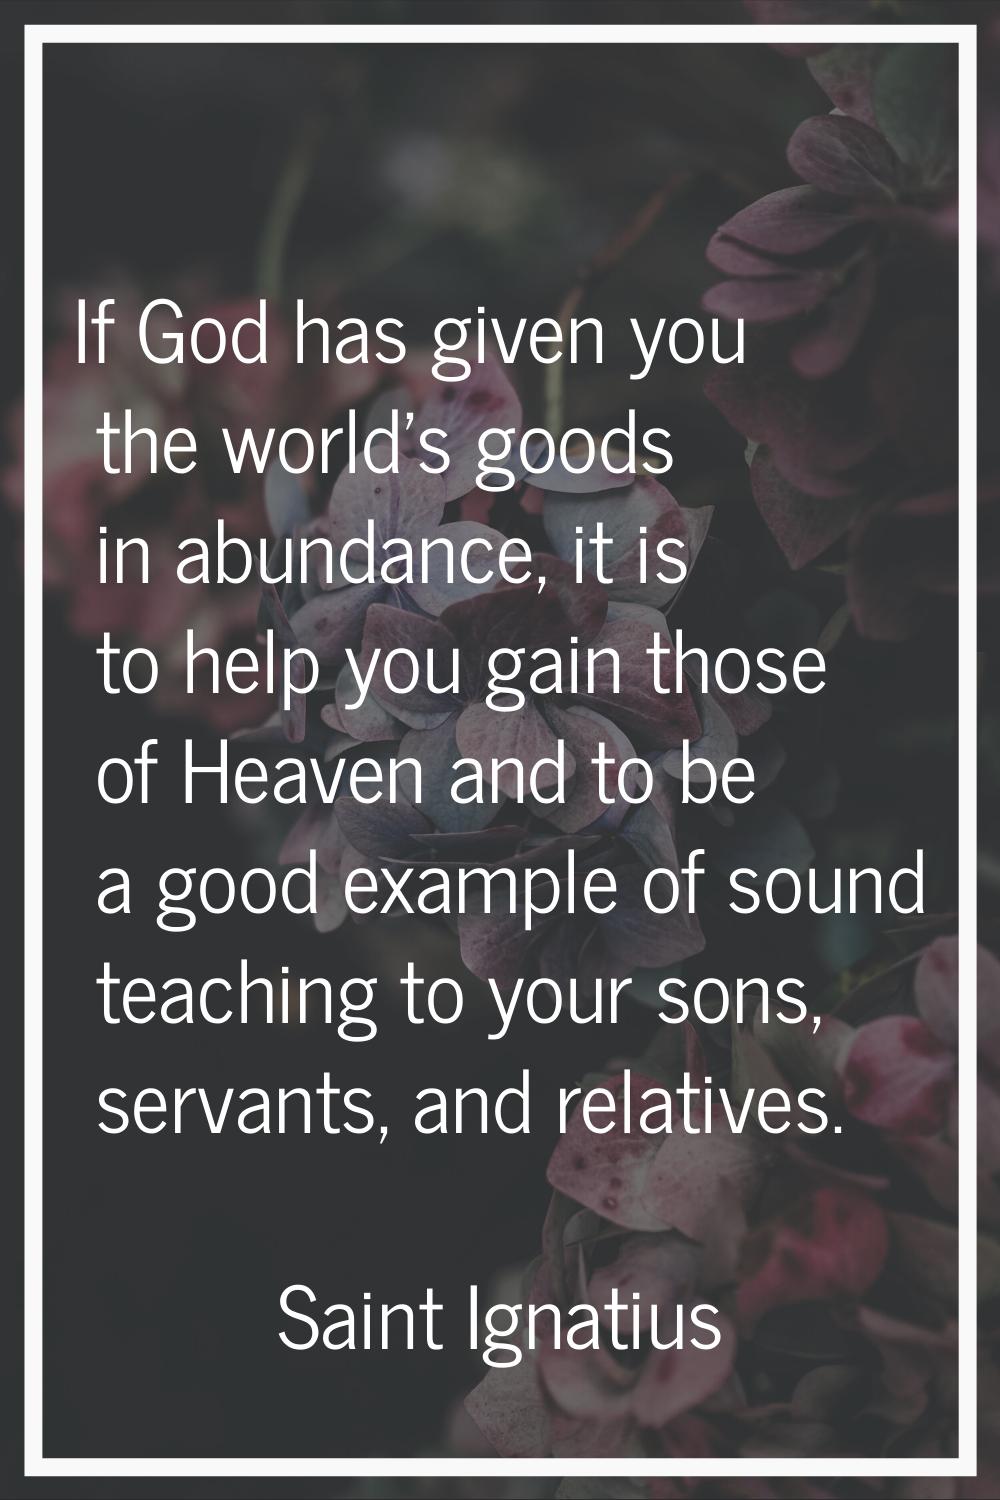 If God has given you the world's goods in abundance, it is to help you gain those of Heaven and to 